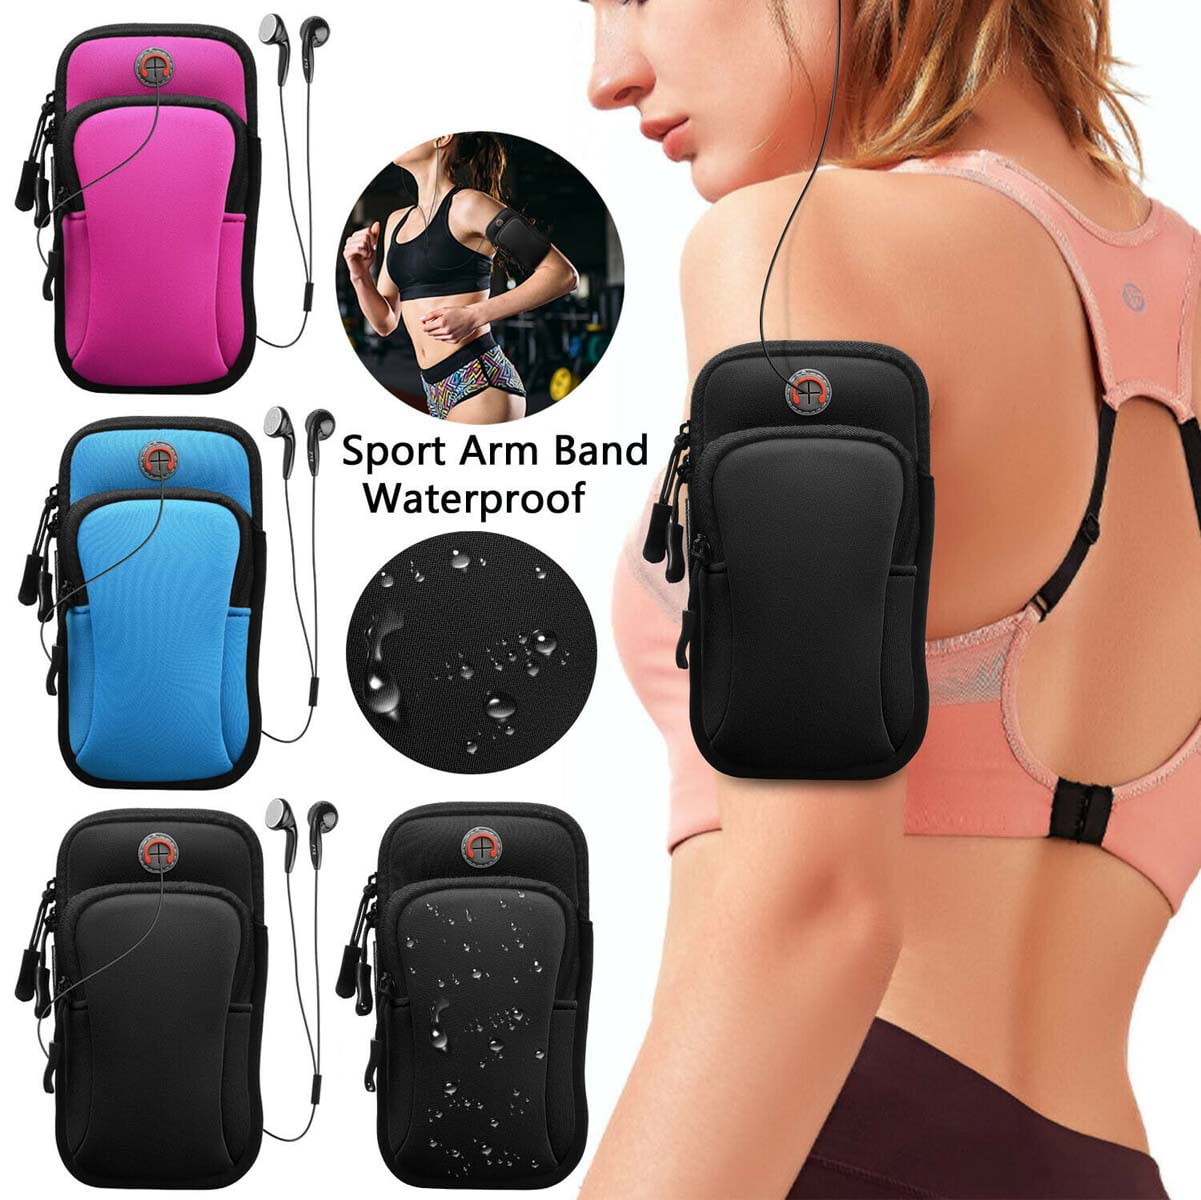 Samsung Galaxy and LG Sports Arm Bag #6 Universal Unisex Armbands Bounce Gym Armbands Phone Holder Pouch Case with Earphone Hole for Apple iPhone 